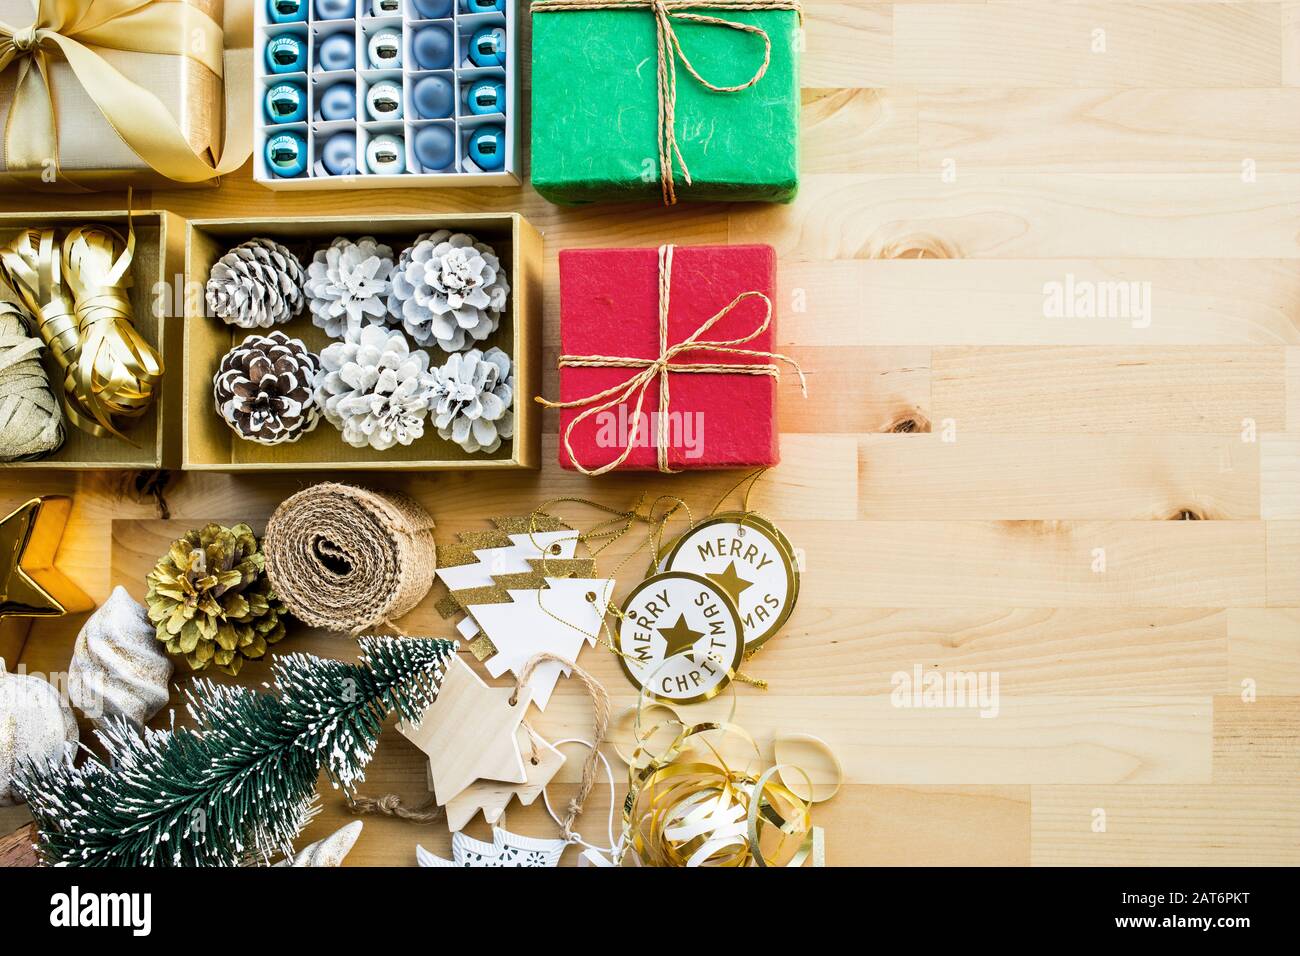 Merry christmas concepts with gift box present and ornament element on wood table background.season's greeting ideas.top view Stock Photo